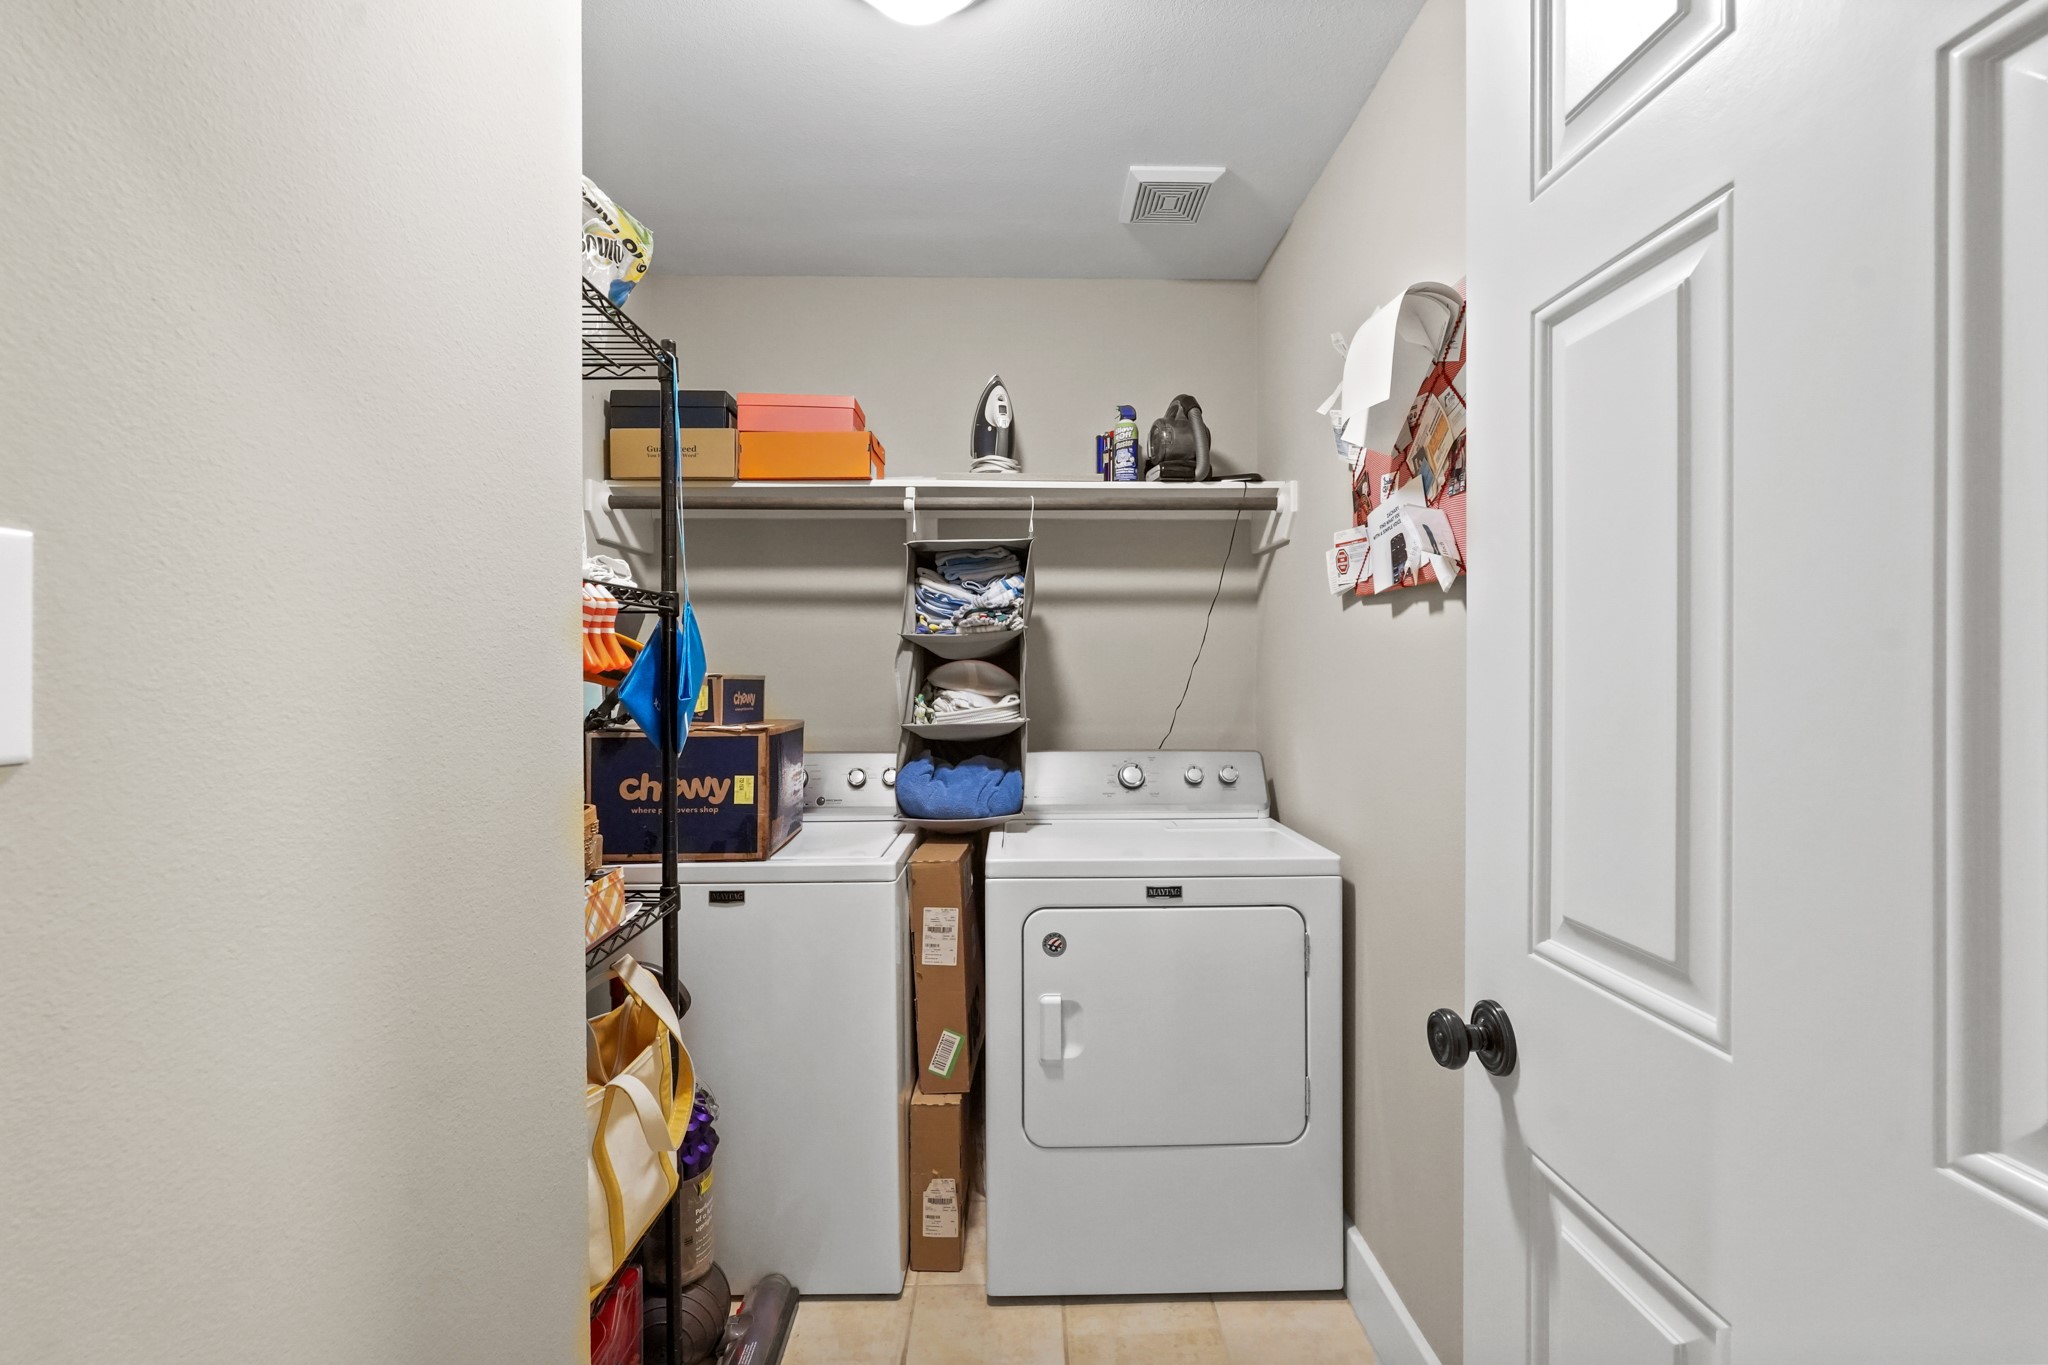 Nearby is this spacious laundry room with additional storage space.